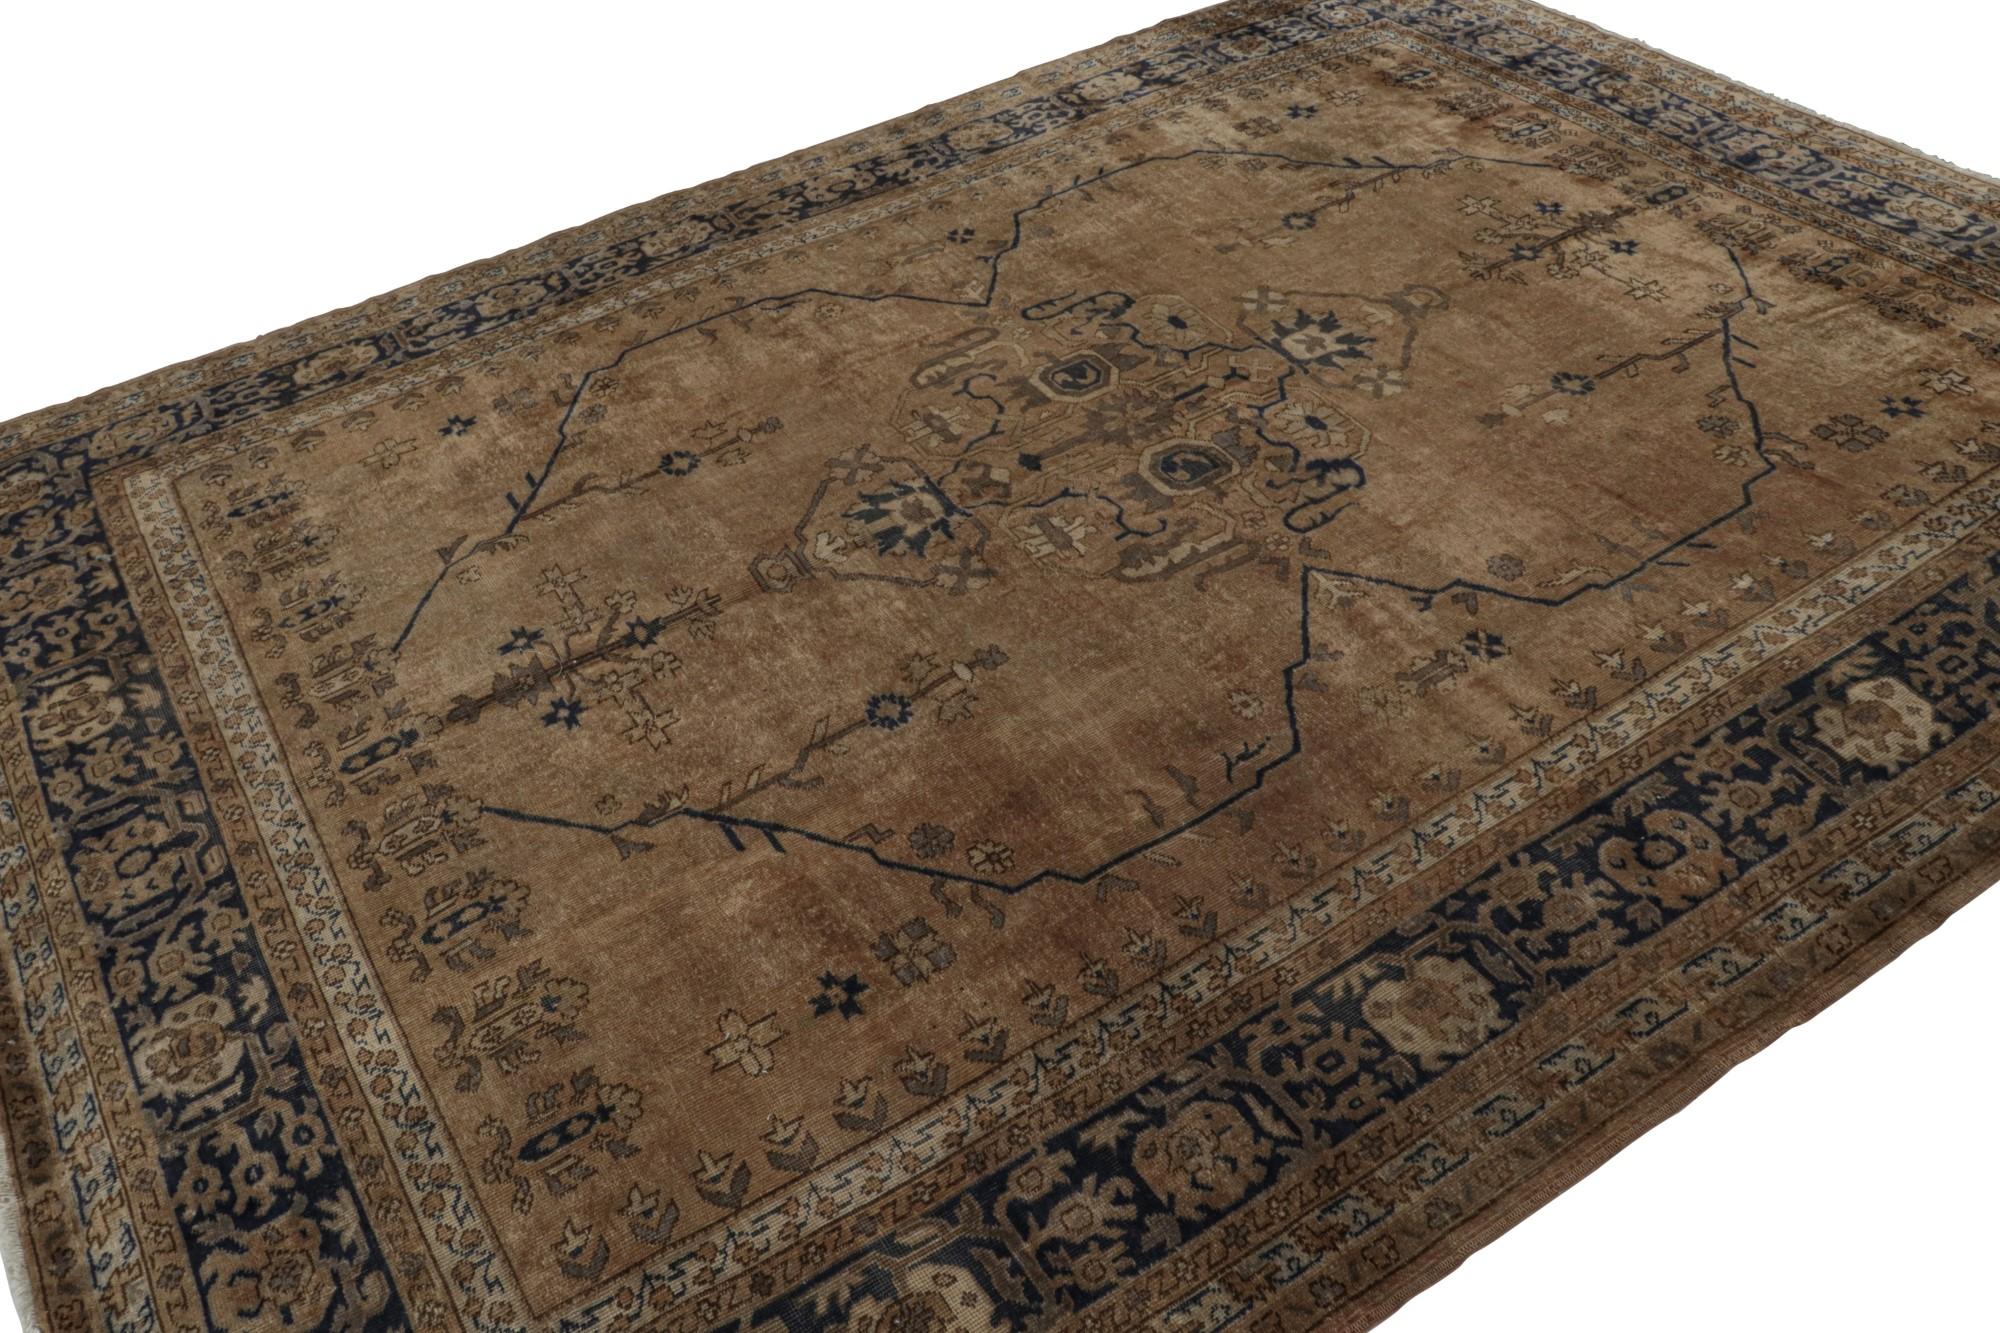 Hand-knotted in wool, this 8x11 antique Turkish Isparta rug, circa 1920-1930, enjoys rich brown and navy blue tones in archaic geometric floral patterns. 

On the Design: 

Originating from the titular region of Turkey, this Isparta rug (sometimes